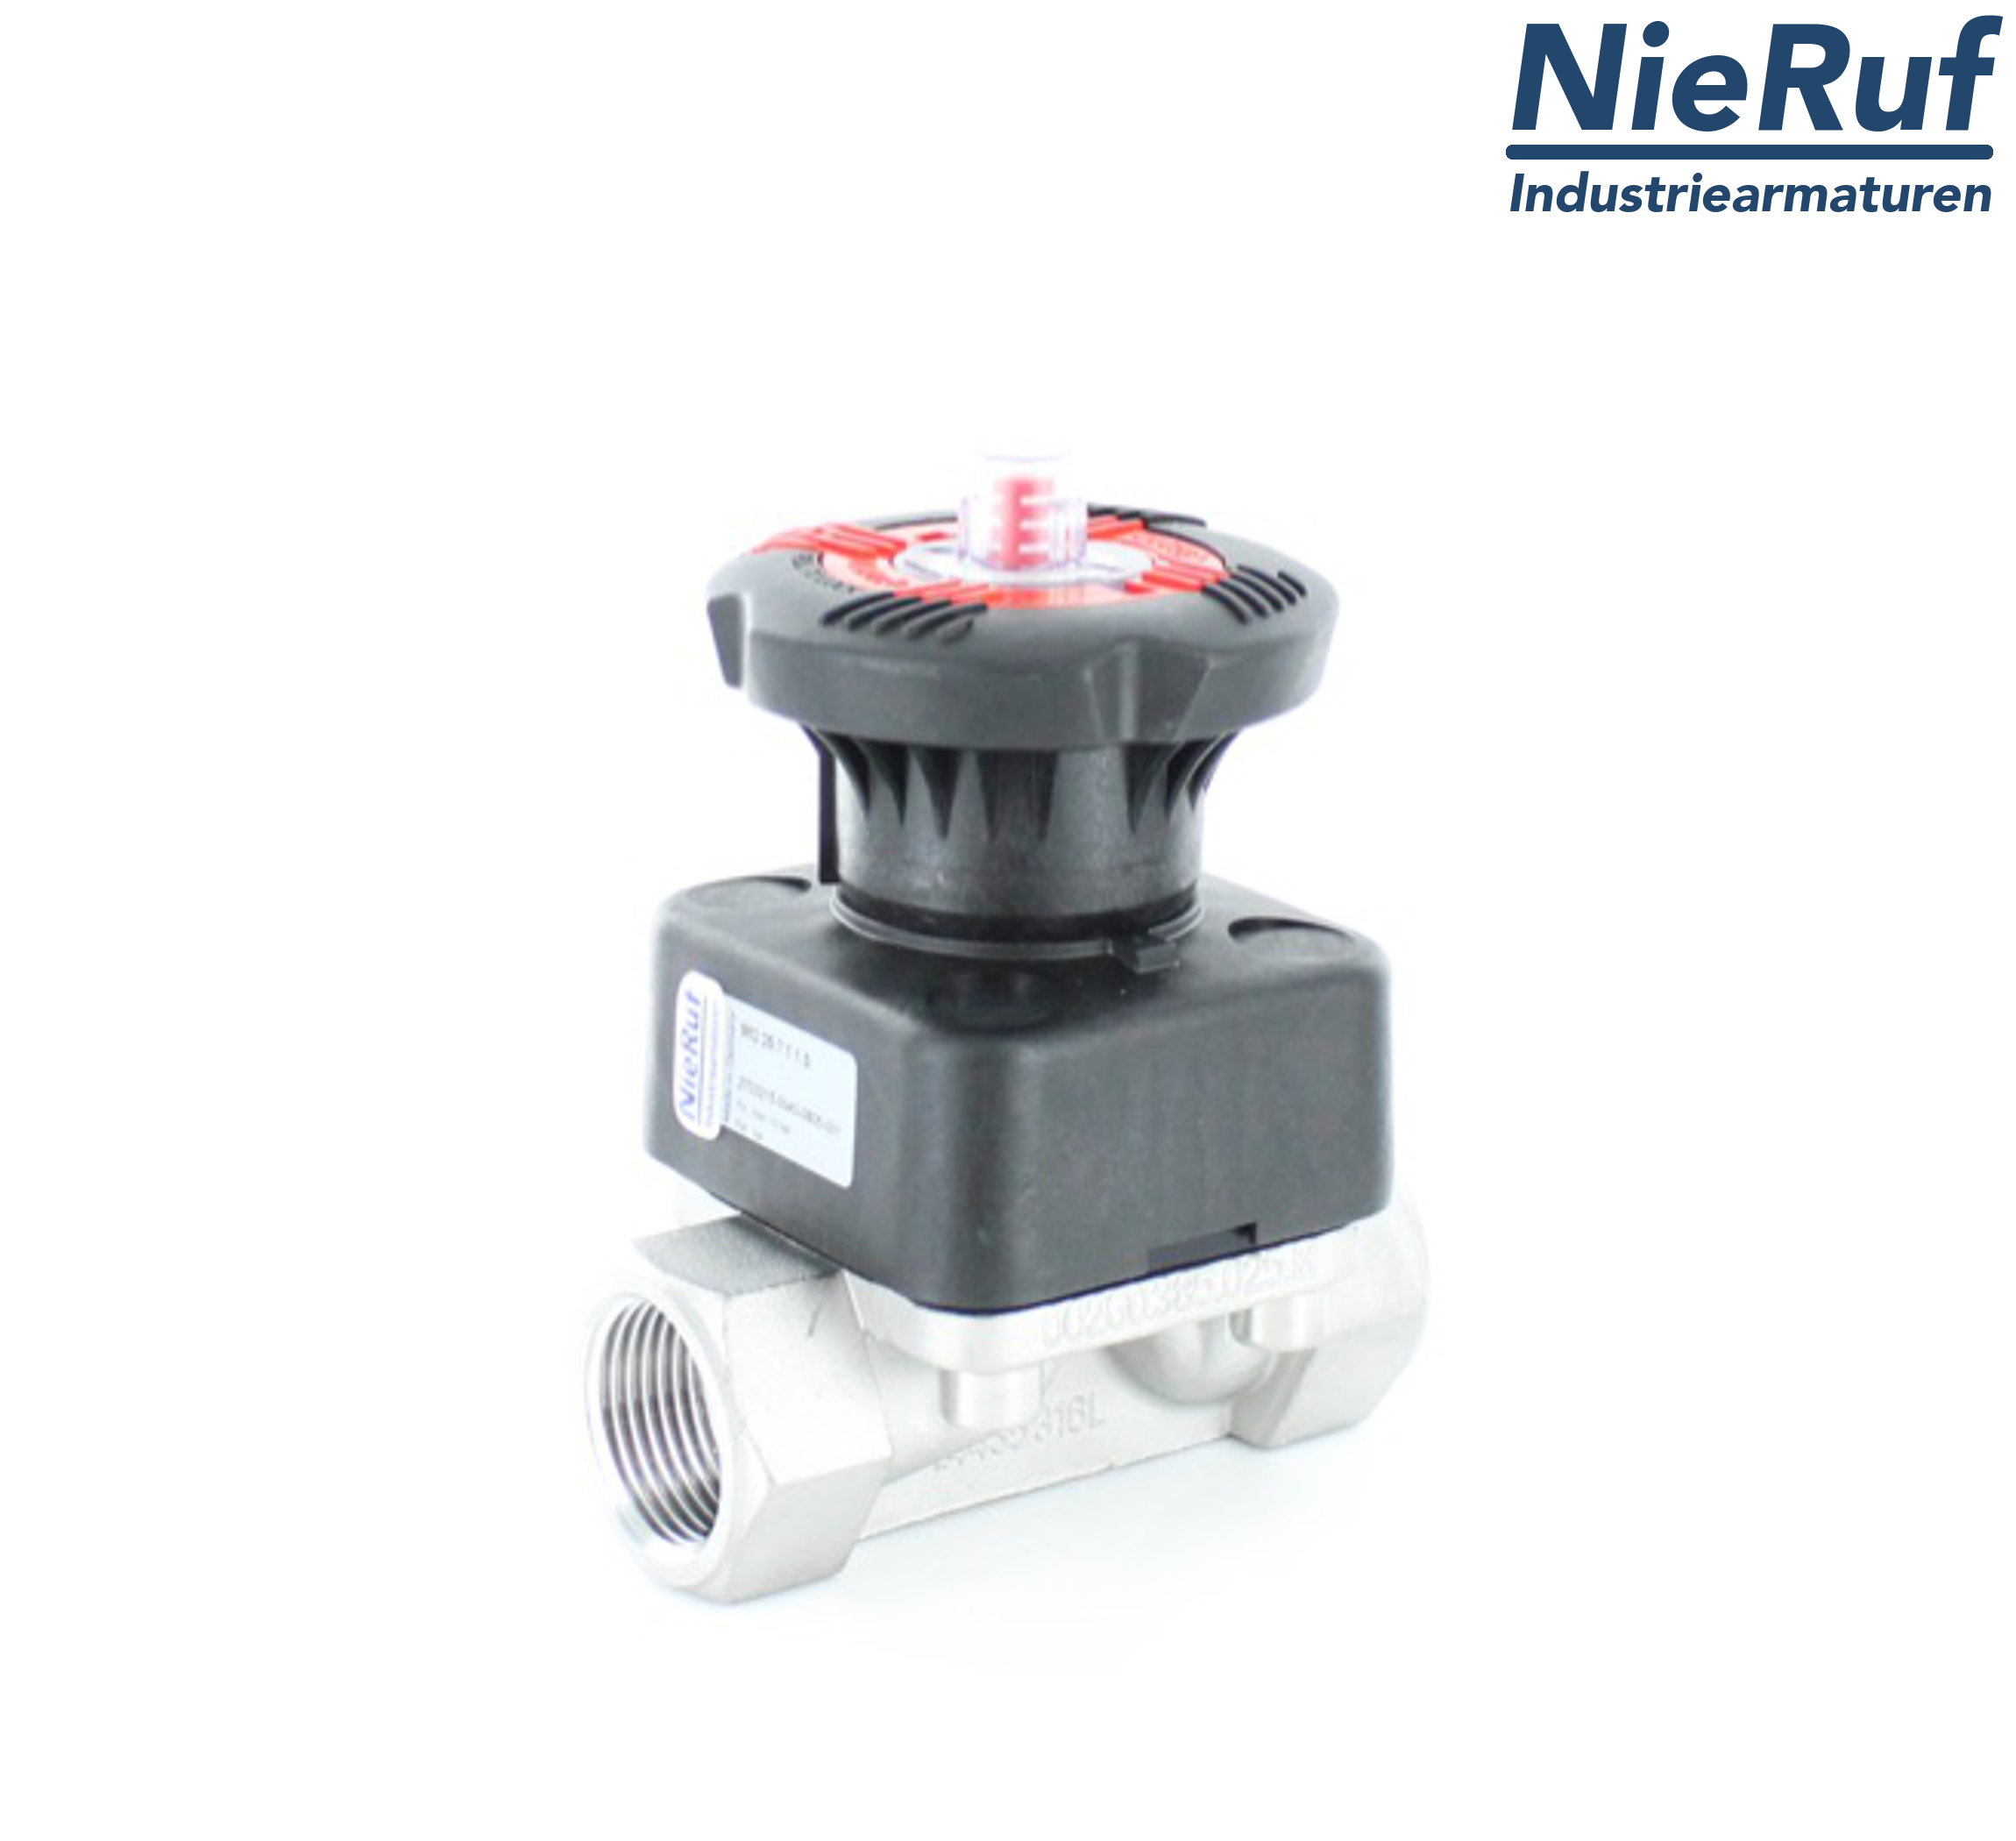 stainless steel-diaphragm valve 3/4 Inch membrane PTFE/EPDM two-piece female thread BSP